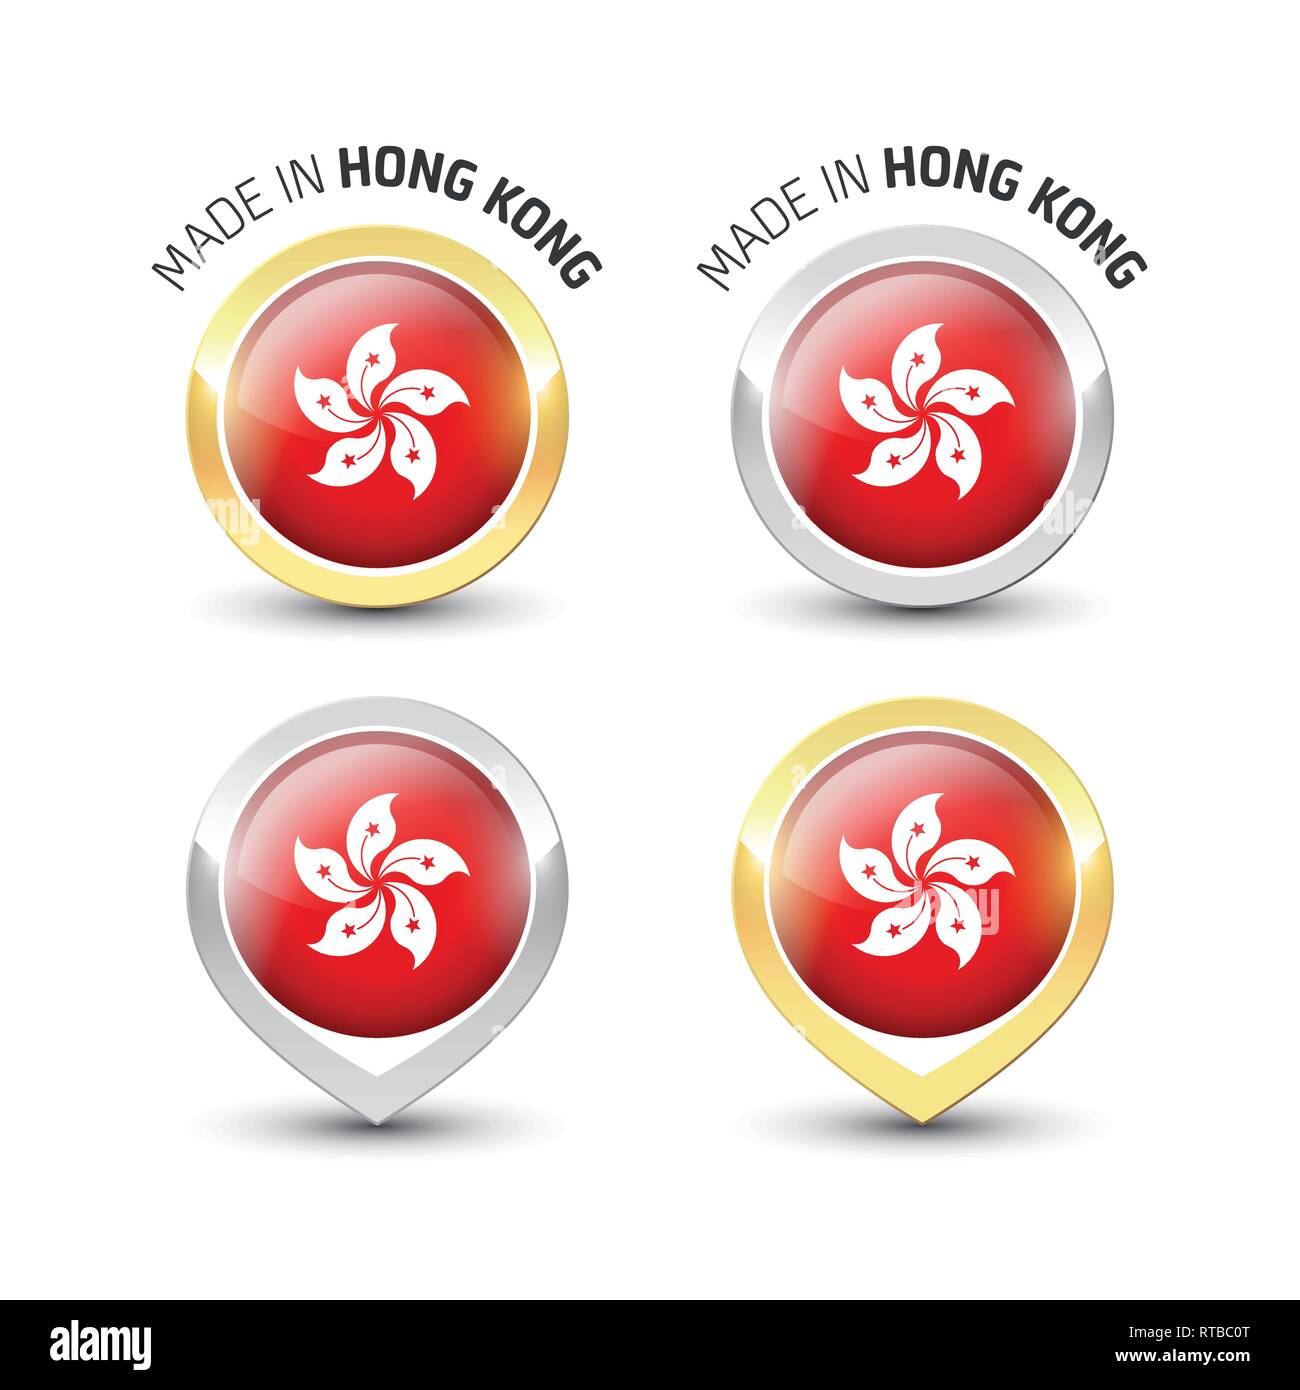 Made in Hong Kong - Guarantee label with the flag of Hong Kong inside round gold and silver icons. Stock Vector